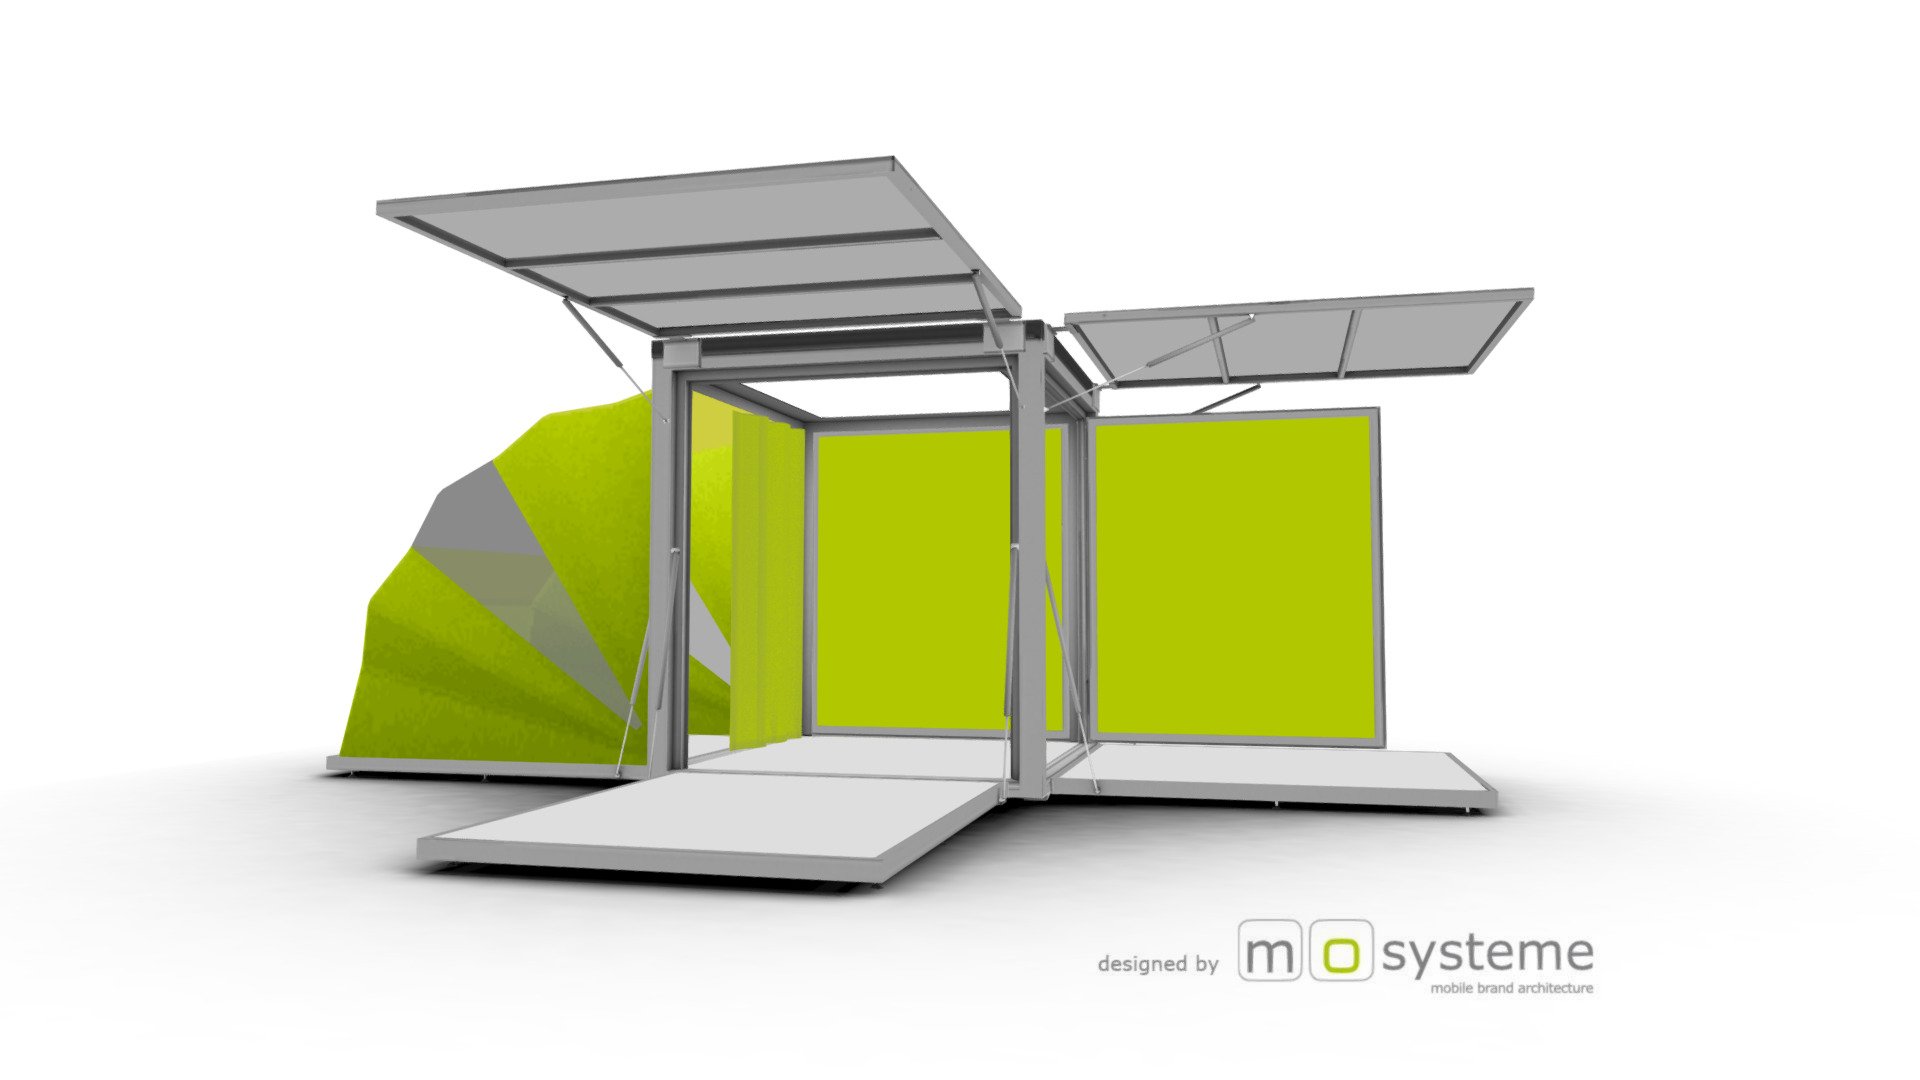 Tent - 3D model by mo-systeme (@mosysteme) 3d model